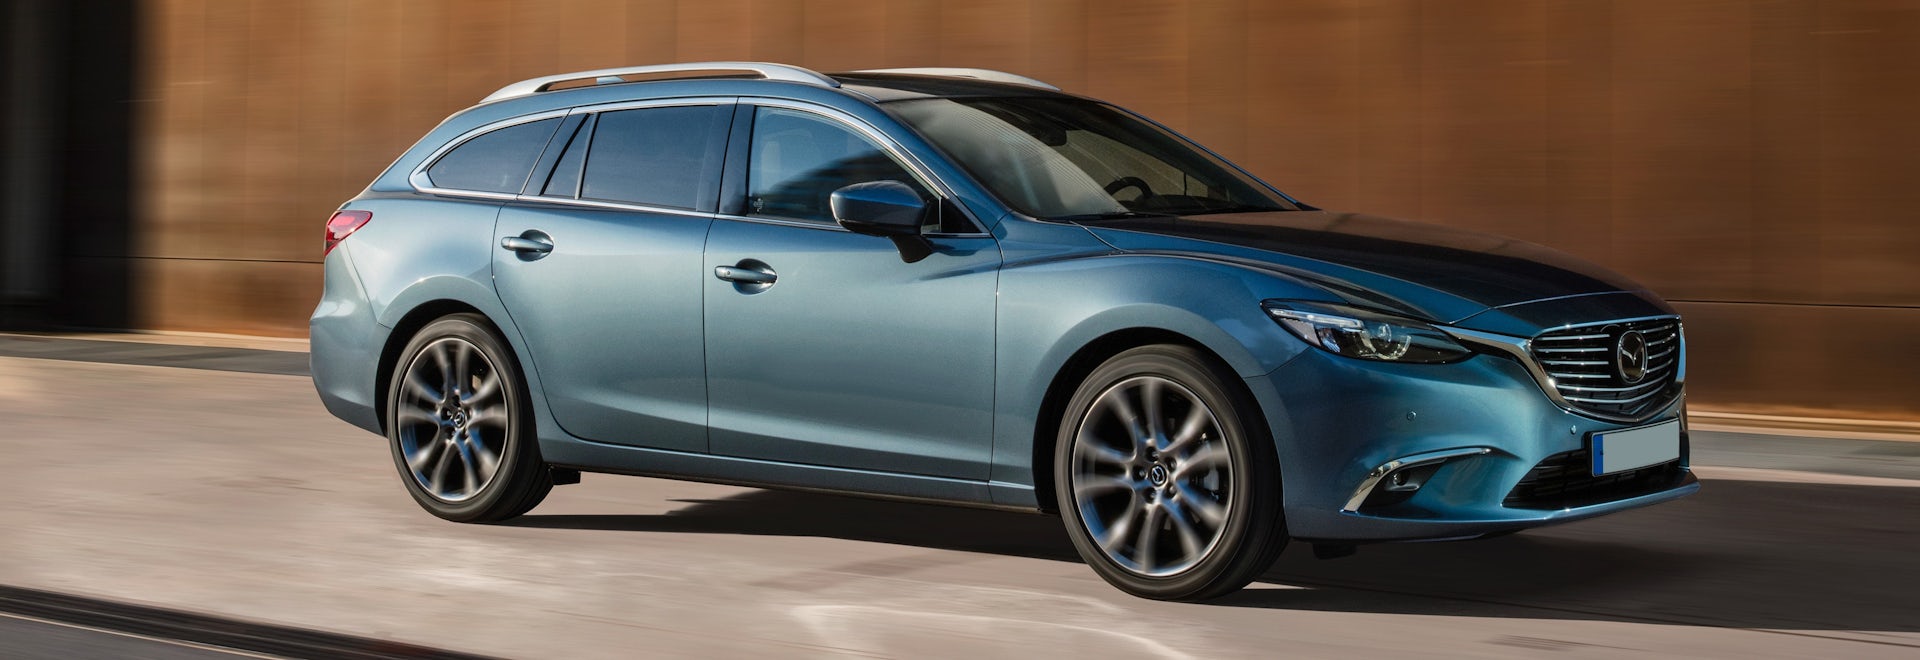 2018 Mazda 6 Price Specs And Release Date Carwow